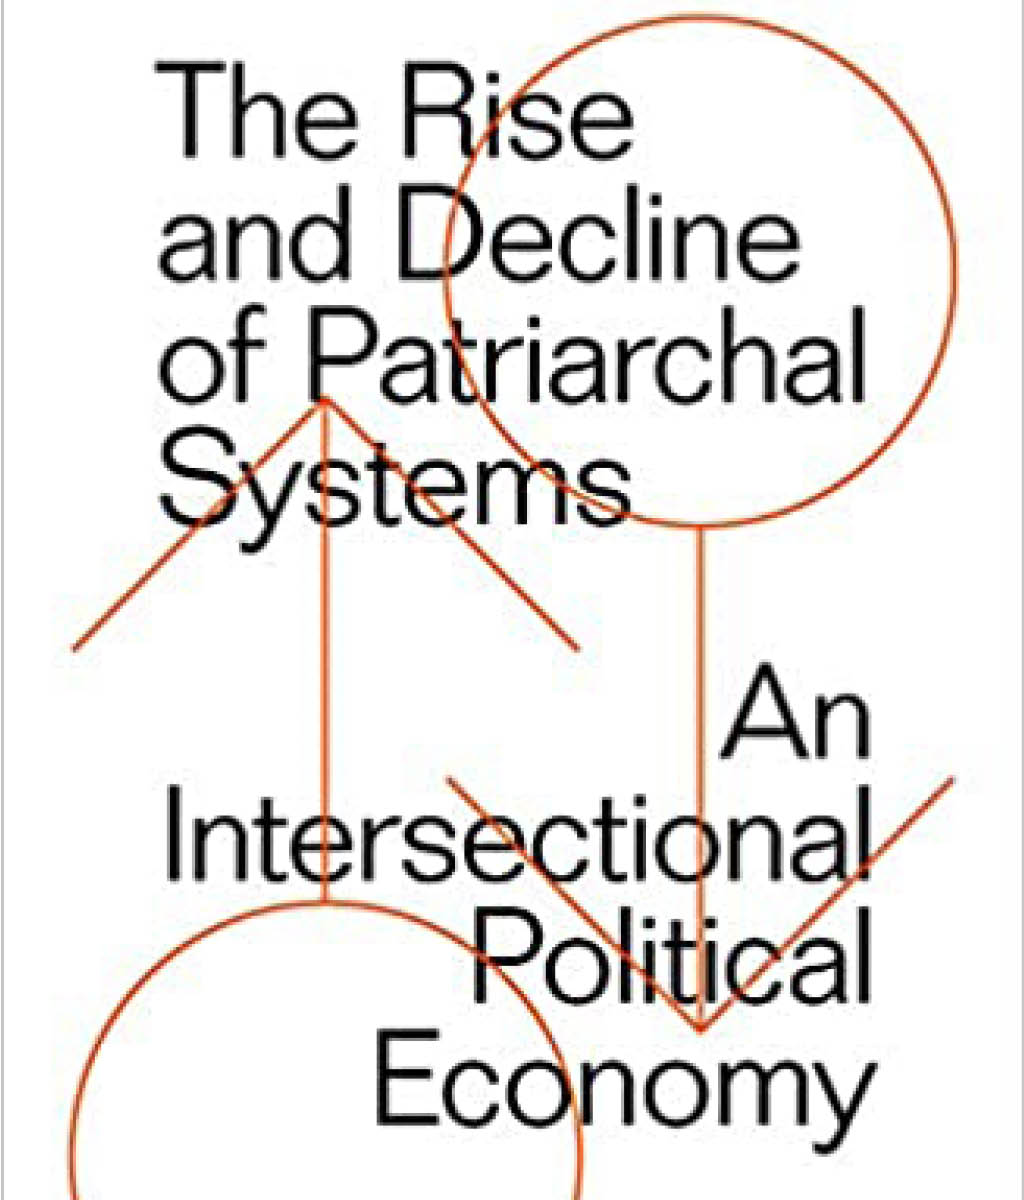 The Rise and Decline of Patriarchal Systems: An Intersectional Political Economy by Nancy Folbre